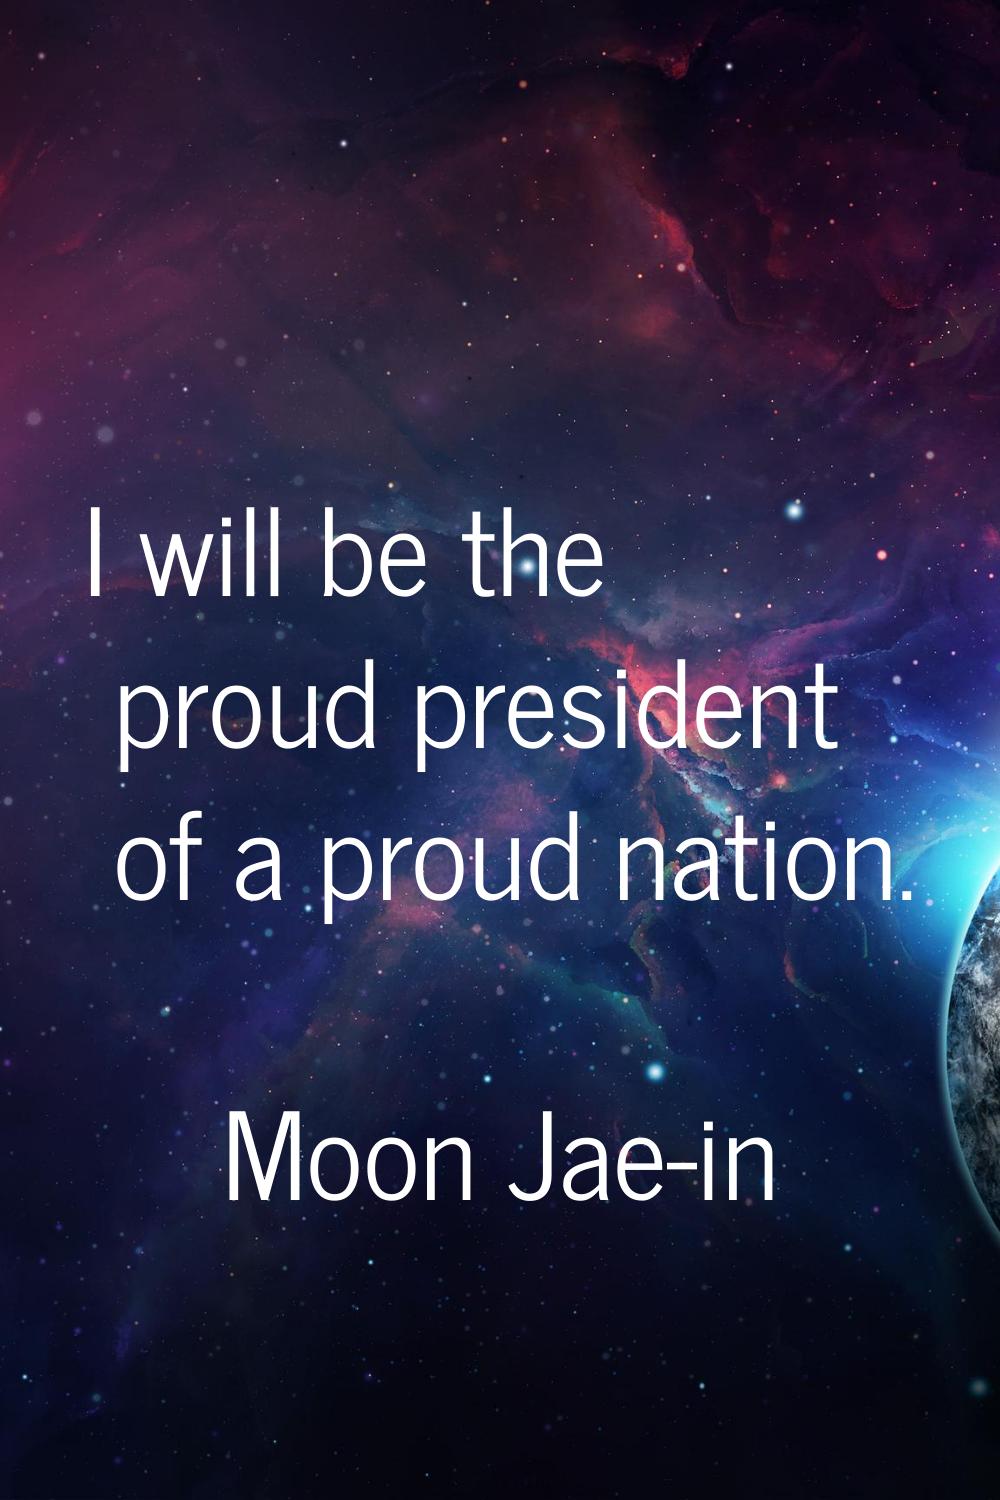 I will be the proud president of a proud nation.